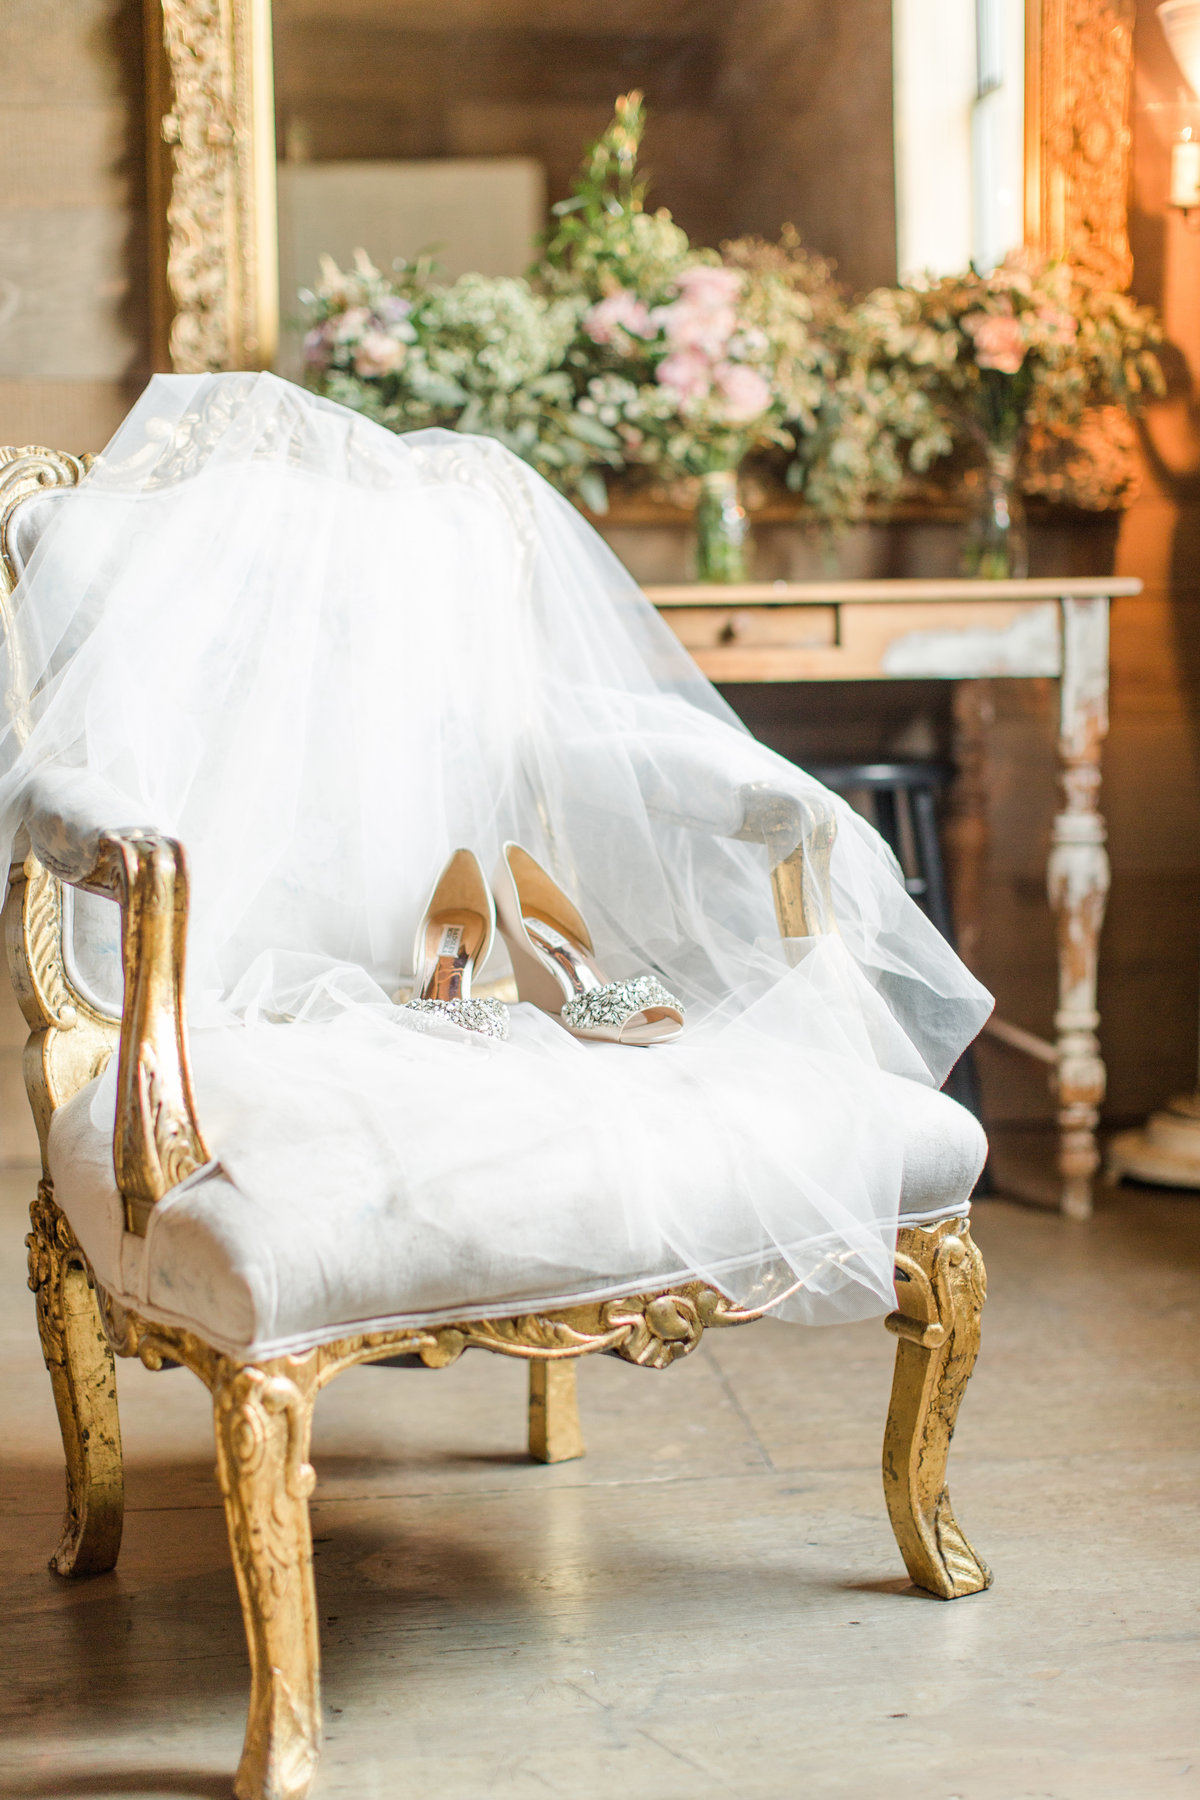 Bride's shoes and veil in chair; The Barn at Shady Lane, Birmingham, Alabama